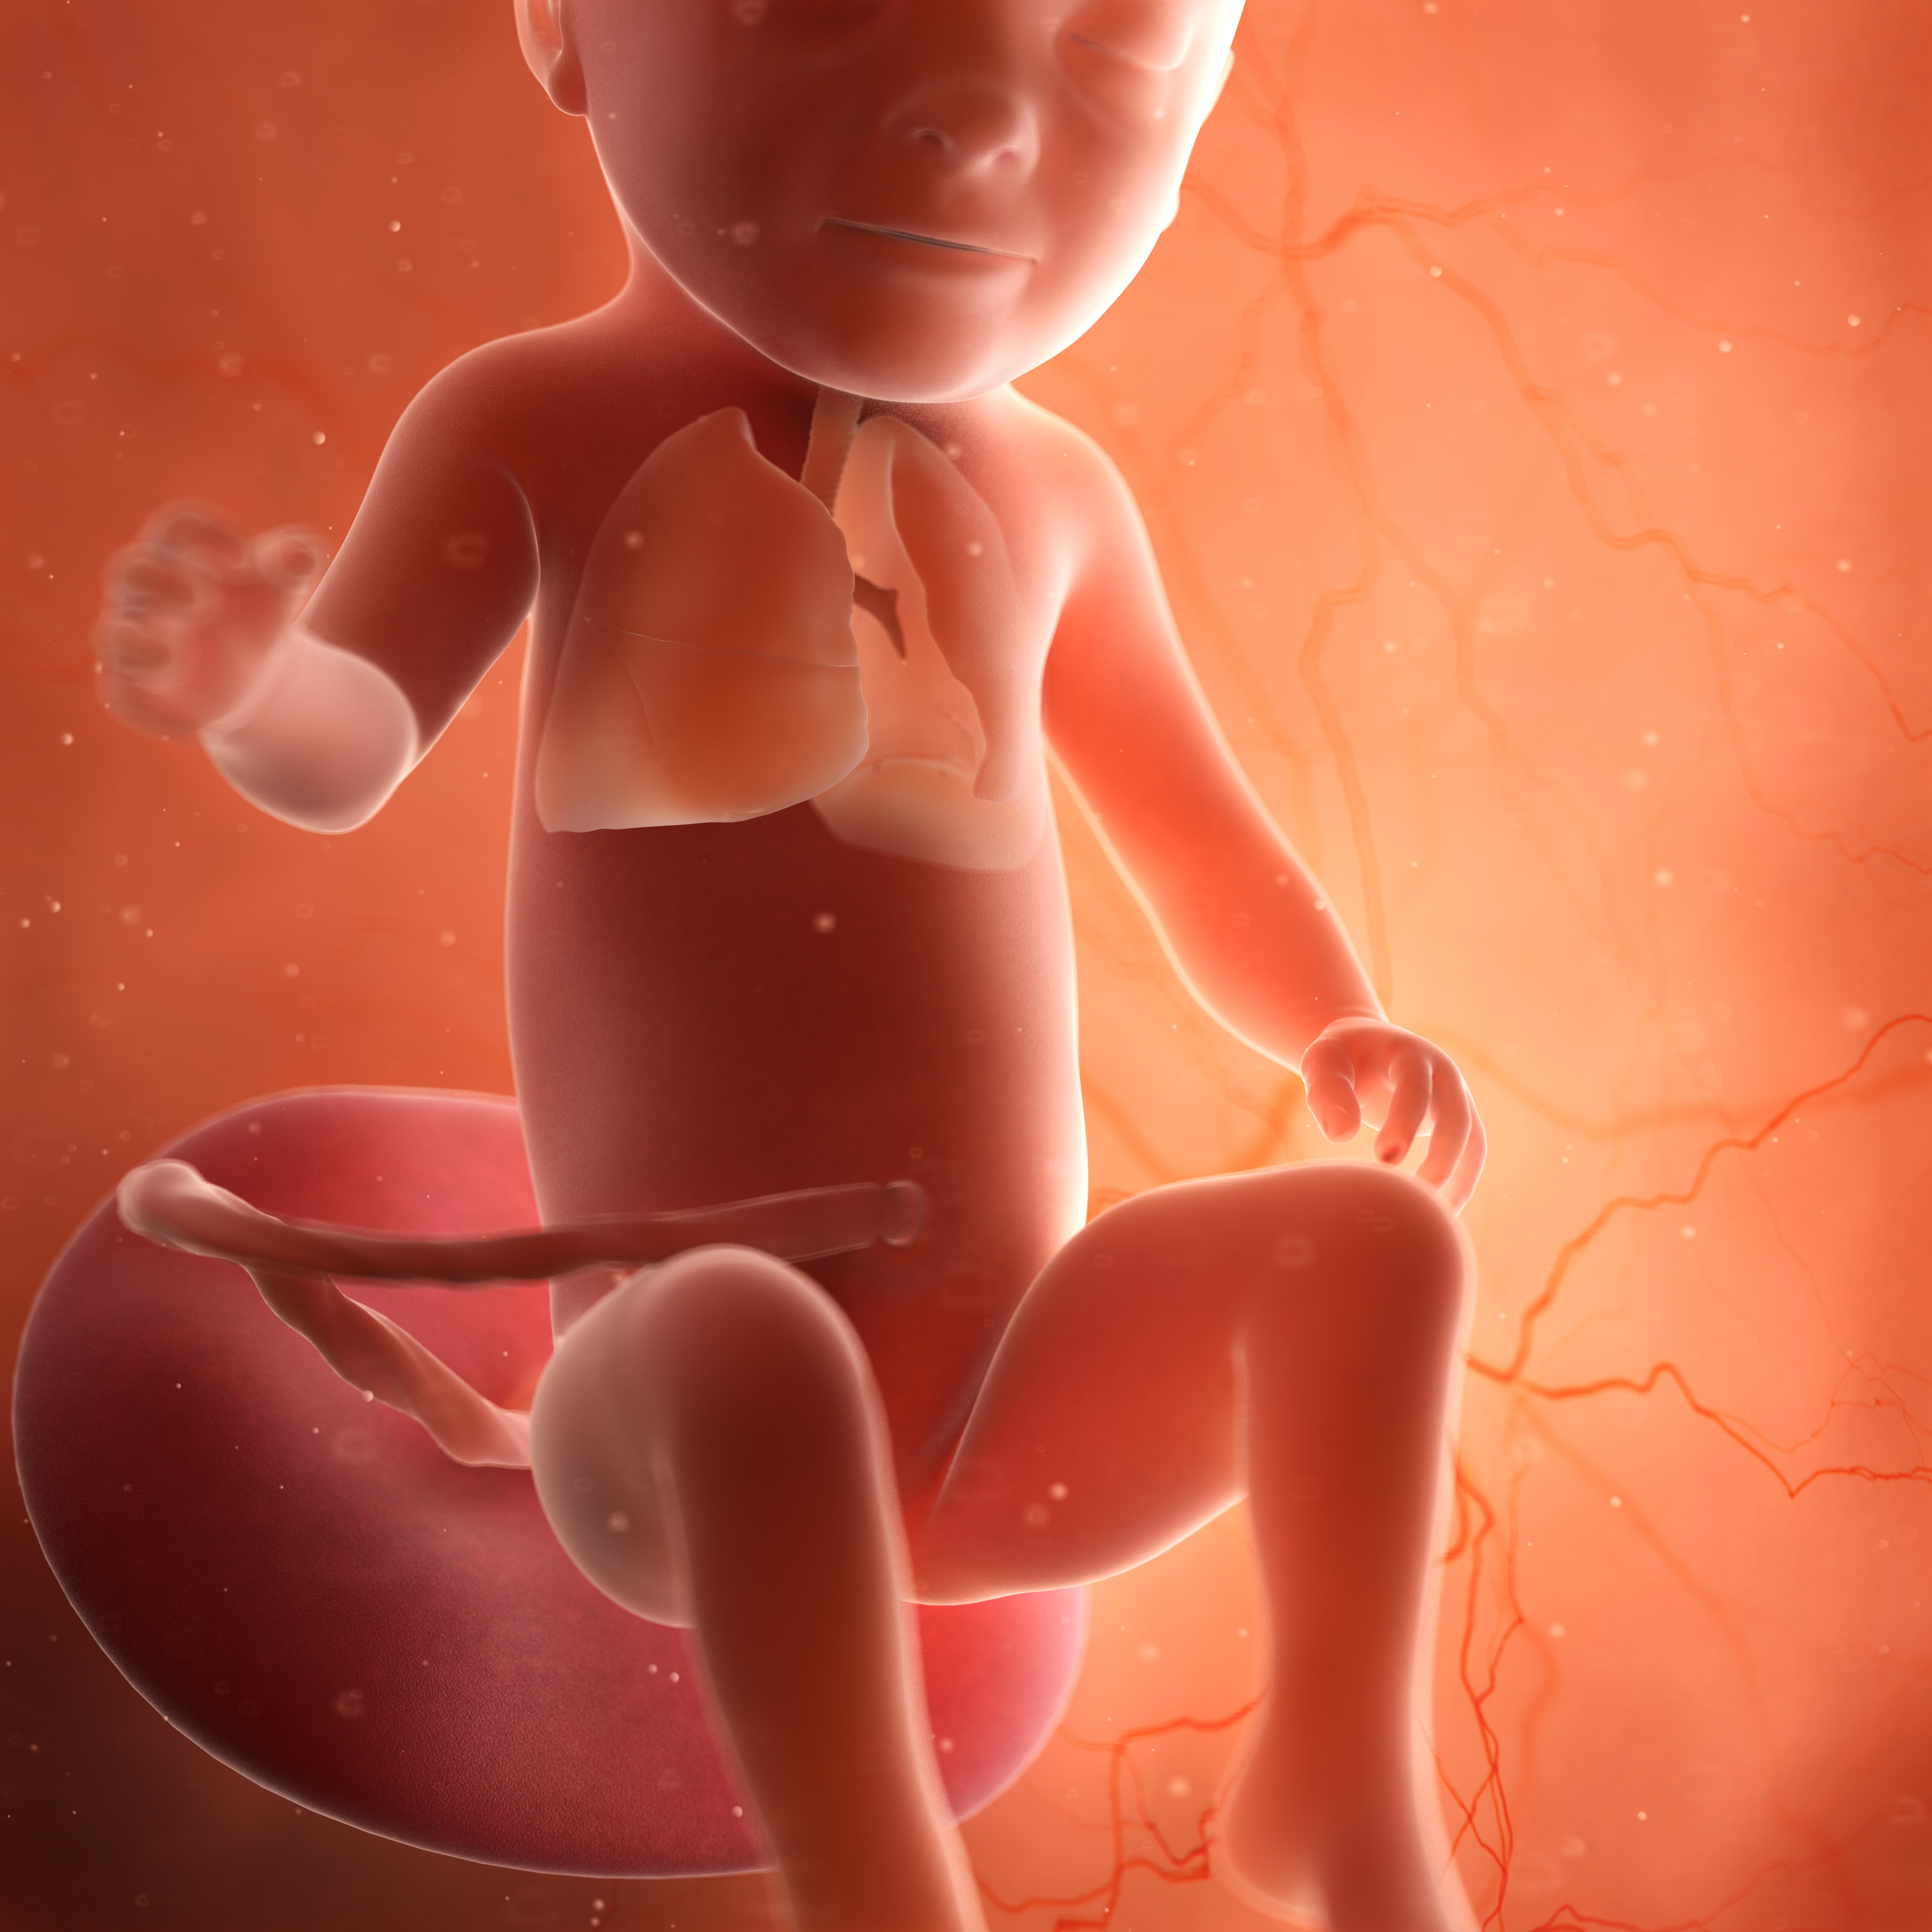 Rendering of a fetus lung